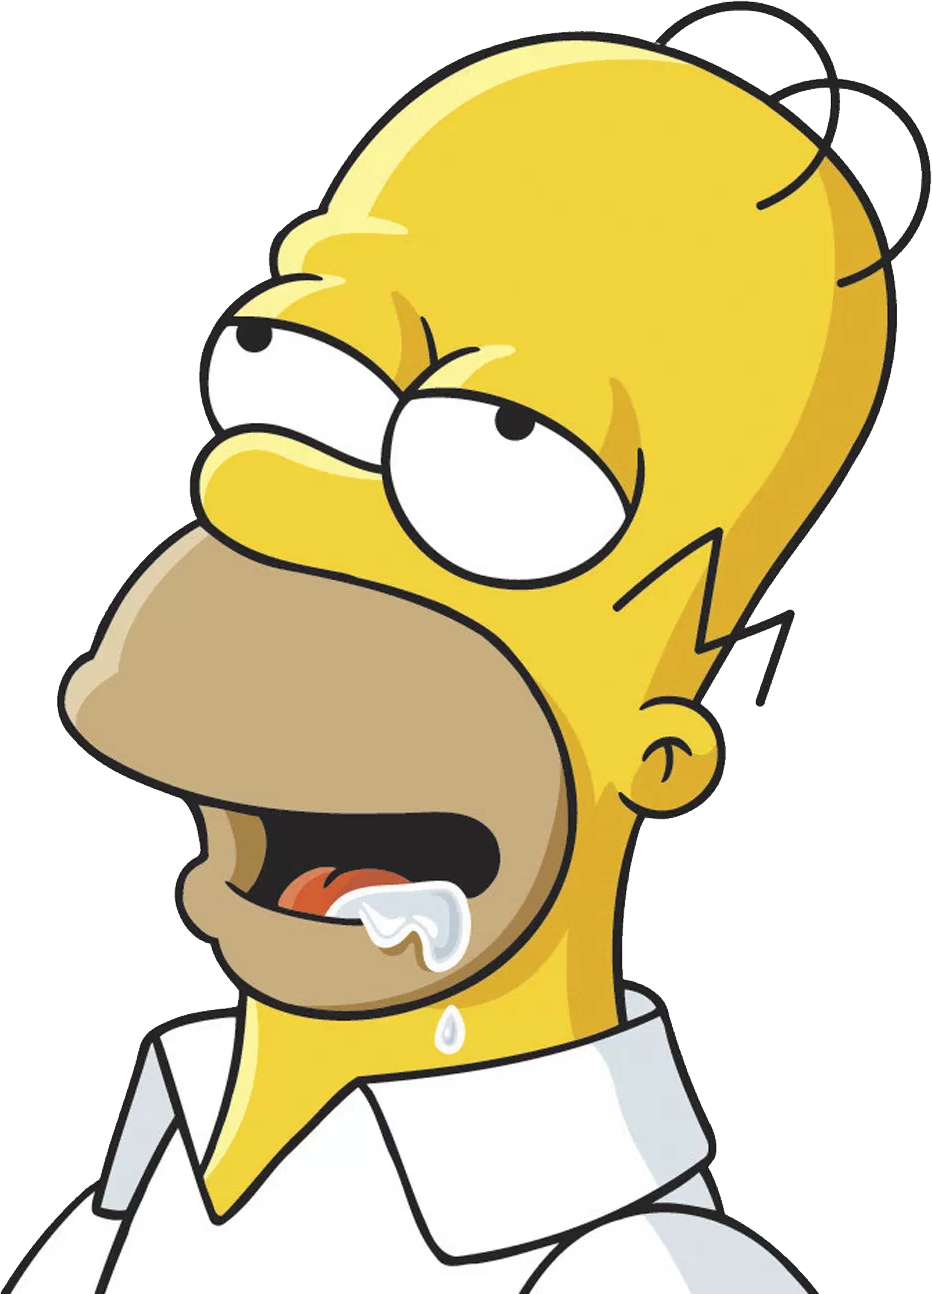 simpsons_PNG8.png